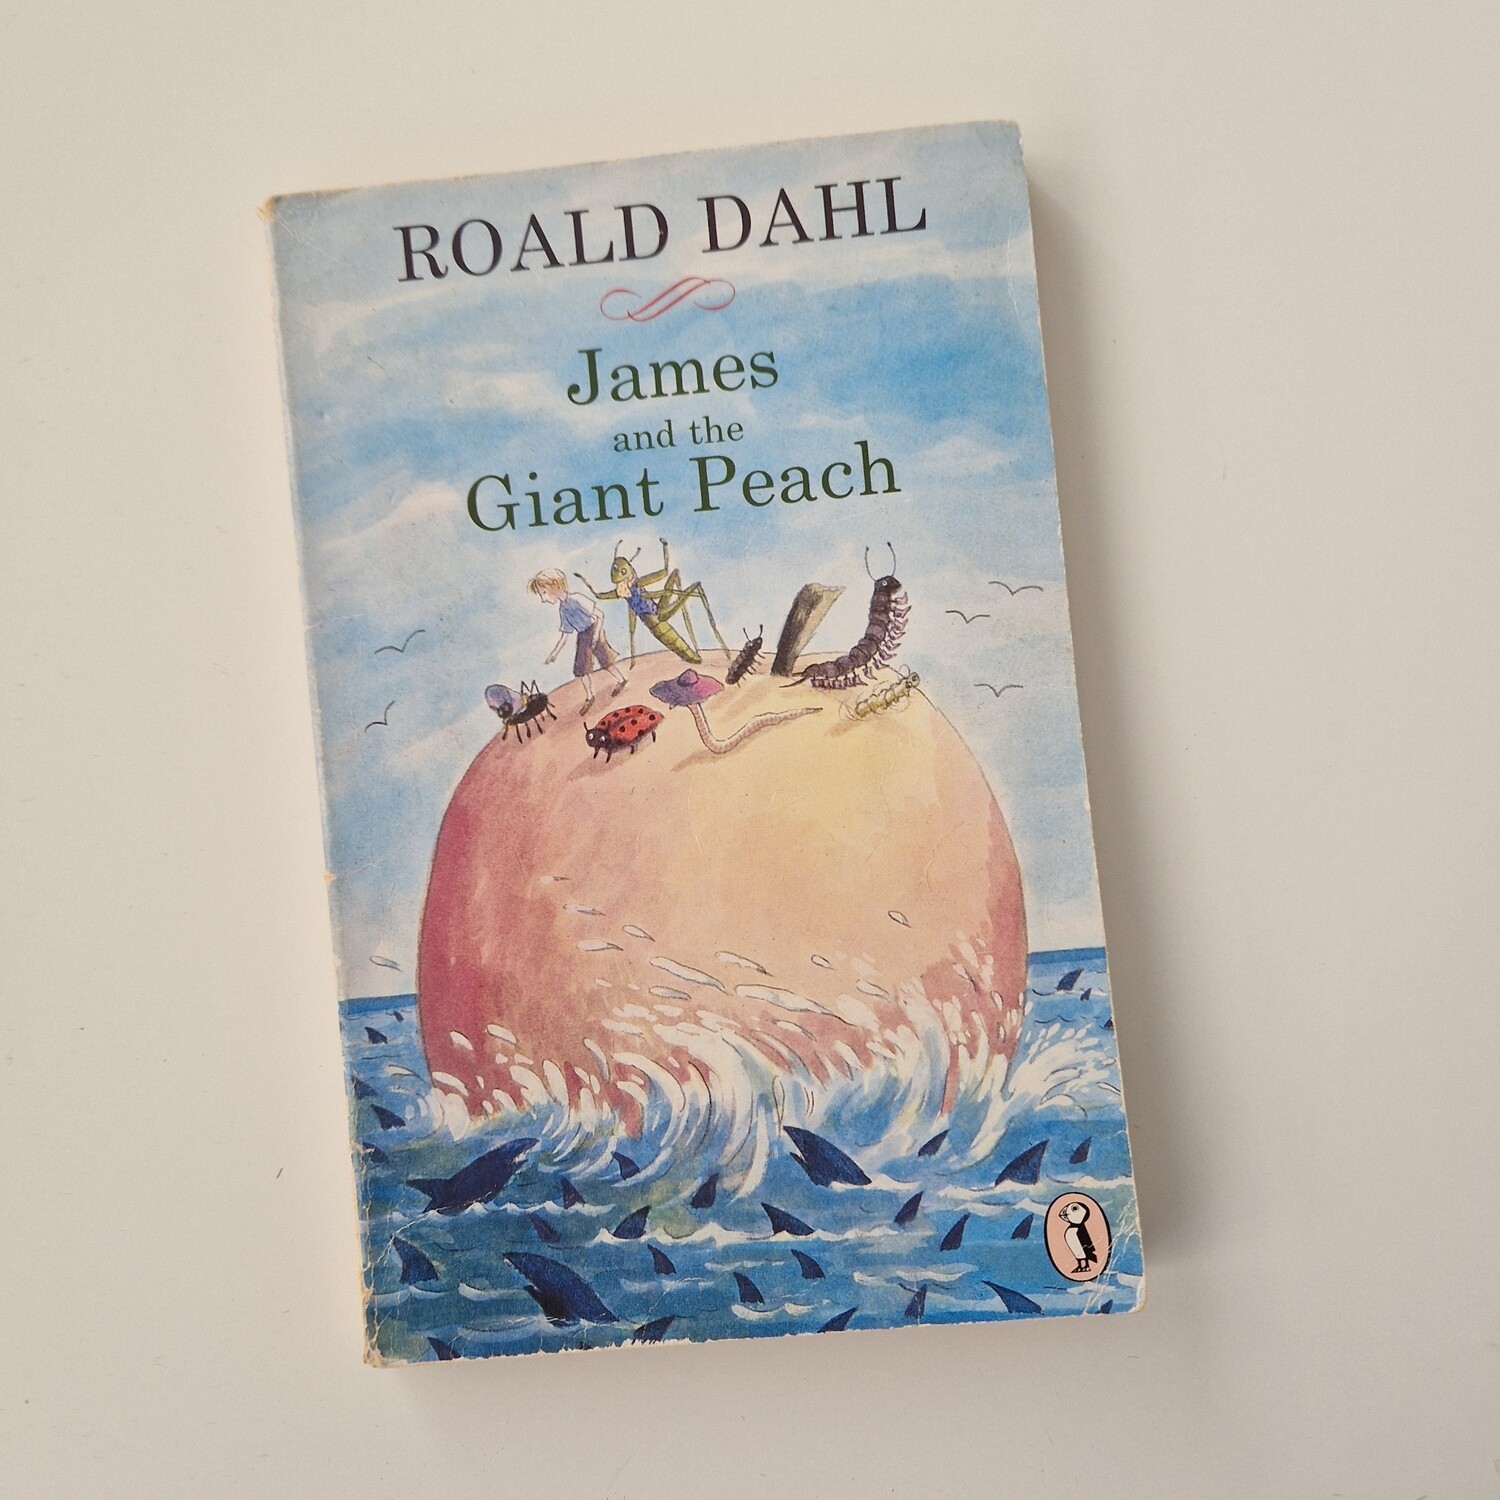 Roald Dahl James and the Giant Peach Notebook- made from a paperback book